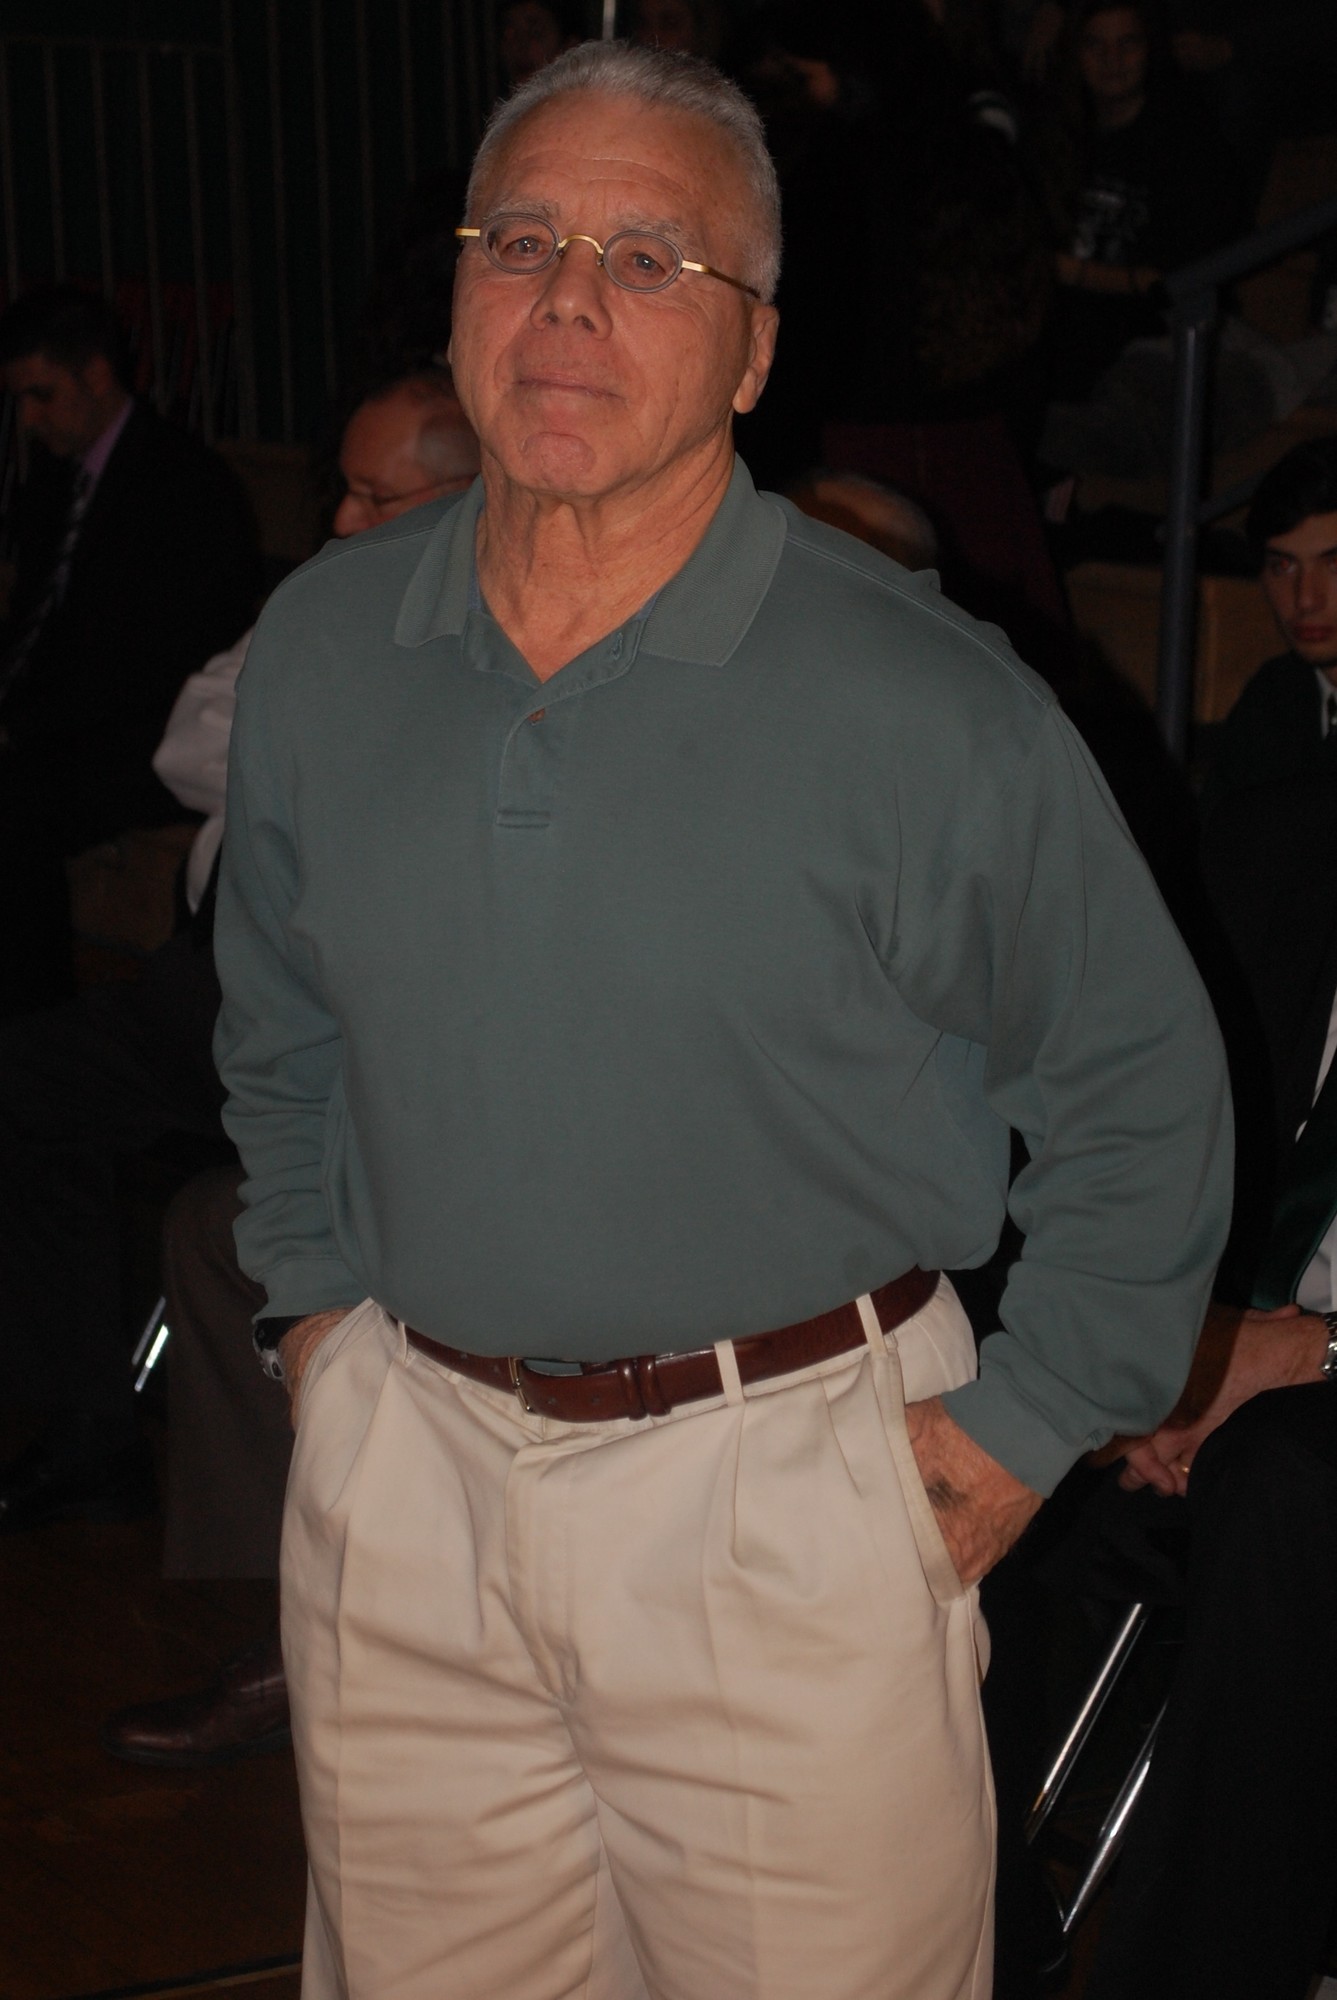 Alumnus Ron Russo, who now lives in Michigan, was honored for his induction into the National Wrestling Hall of Fame.